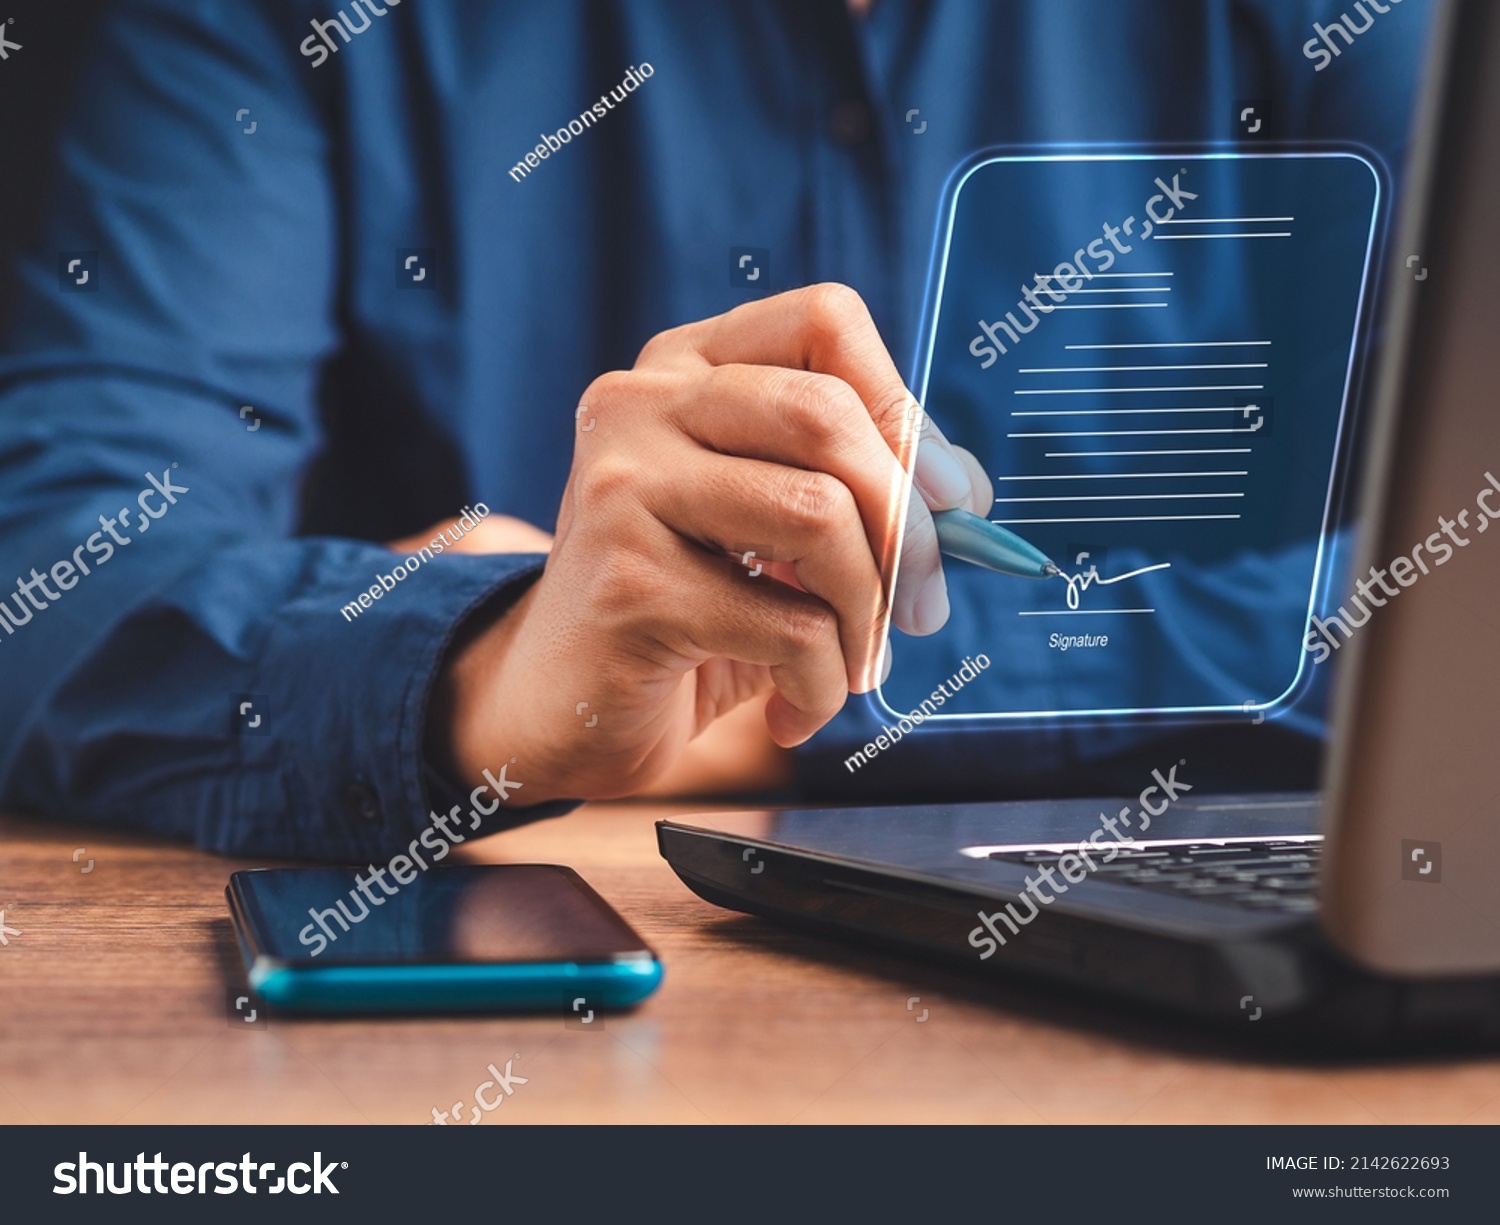 Electronic signature and paperless office concept. A businessman uses a pen to sign electronic documents on digital documents on a virtual screen. E-signing. Technology and document management #2142622693